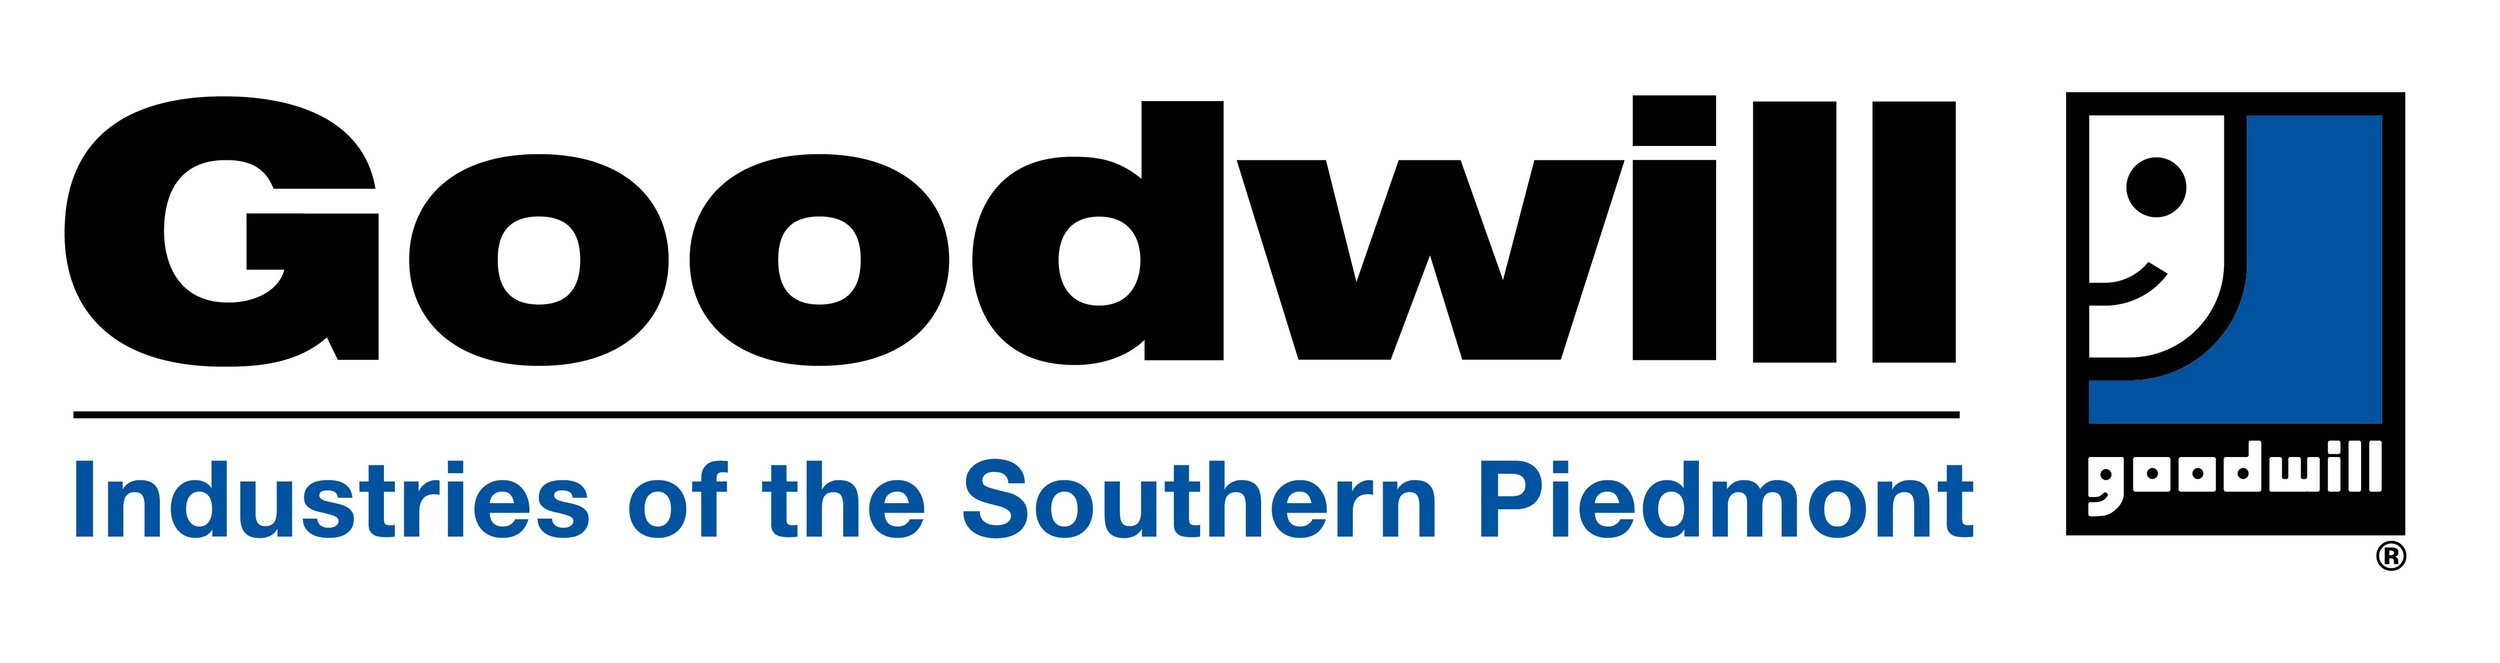 Goodwill-Industries-of-the-Southern-Piedmont-Logo.jpg